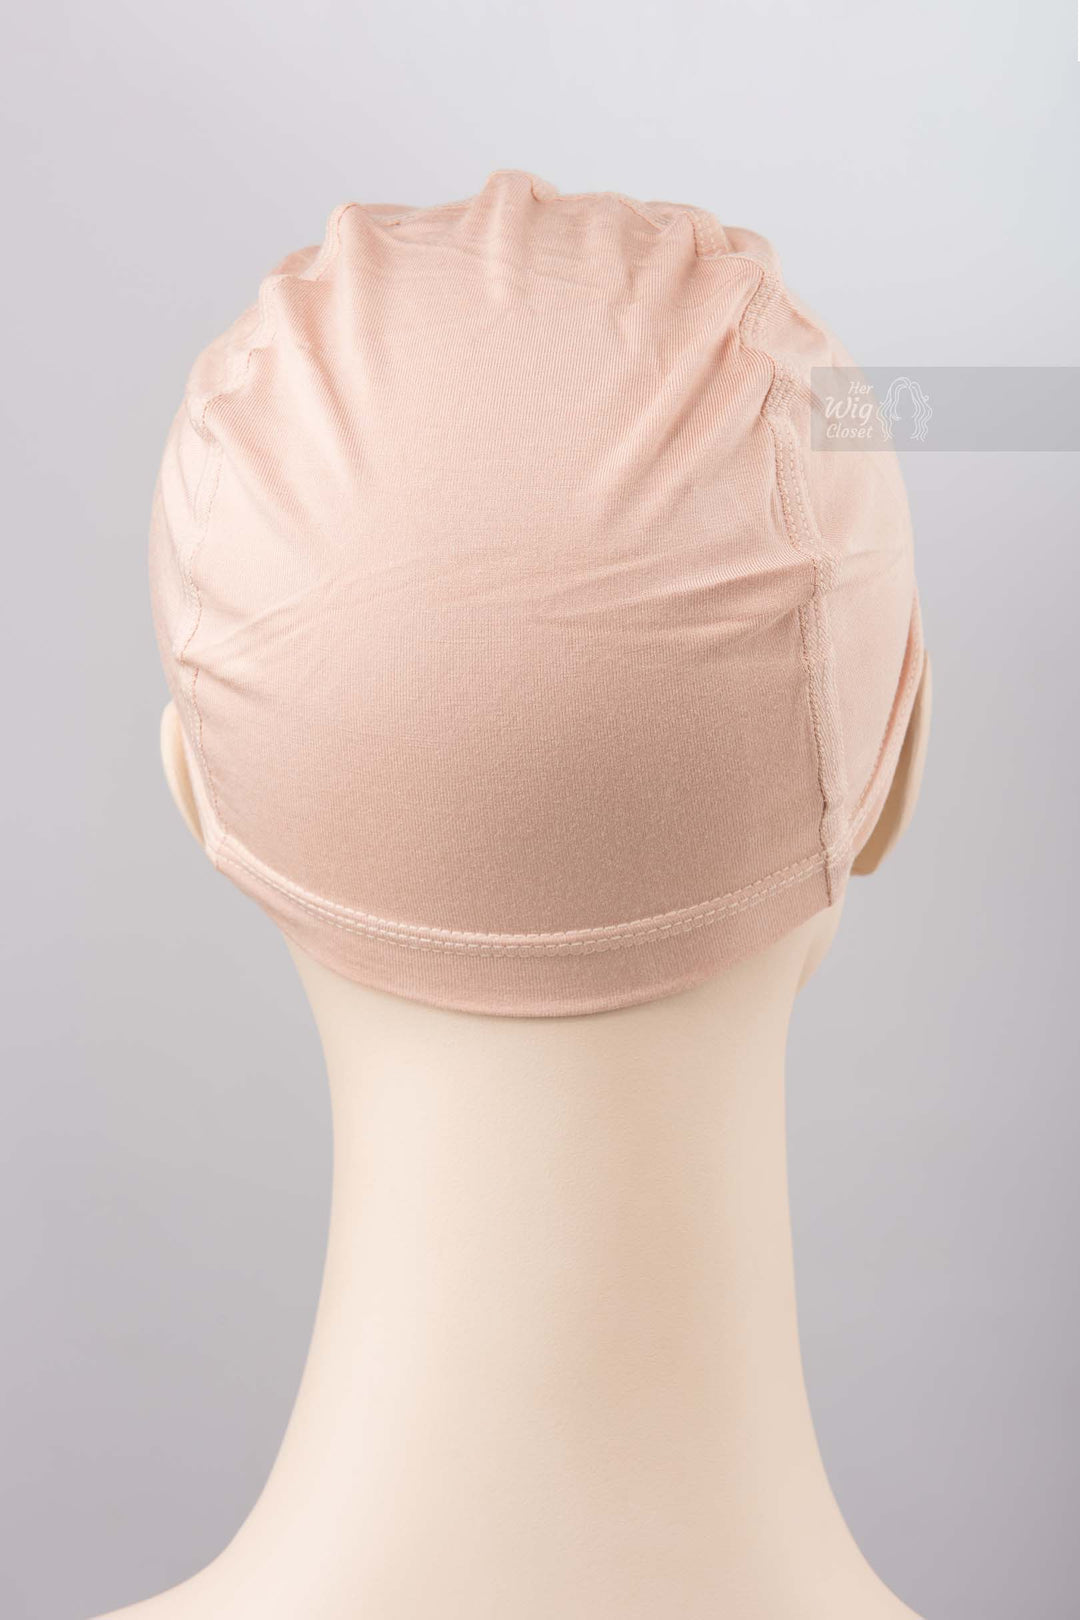 Soft Bamboo Wig Cap Comfortable Hair Loss Solution for Chemo and Alopecia - Premium Quality Bamboo Wig Liner